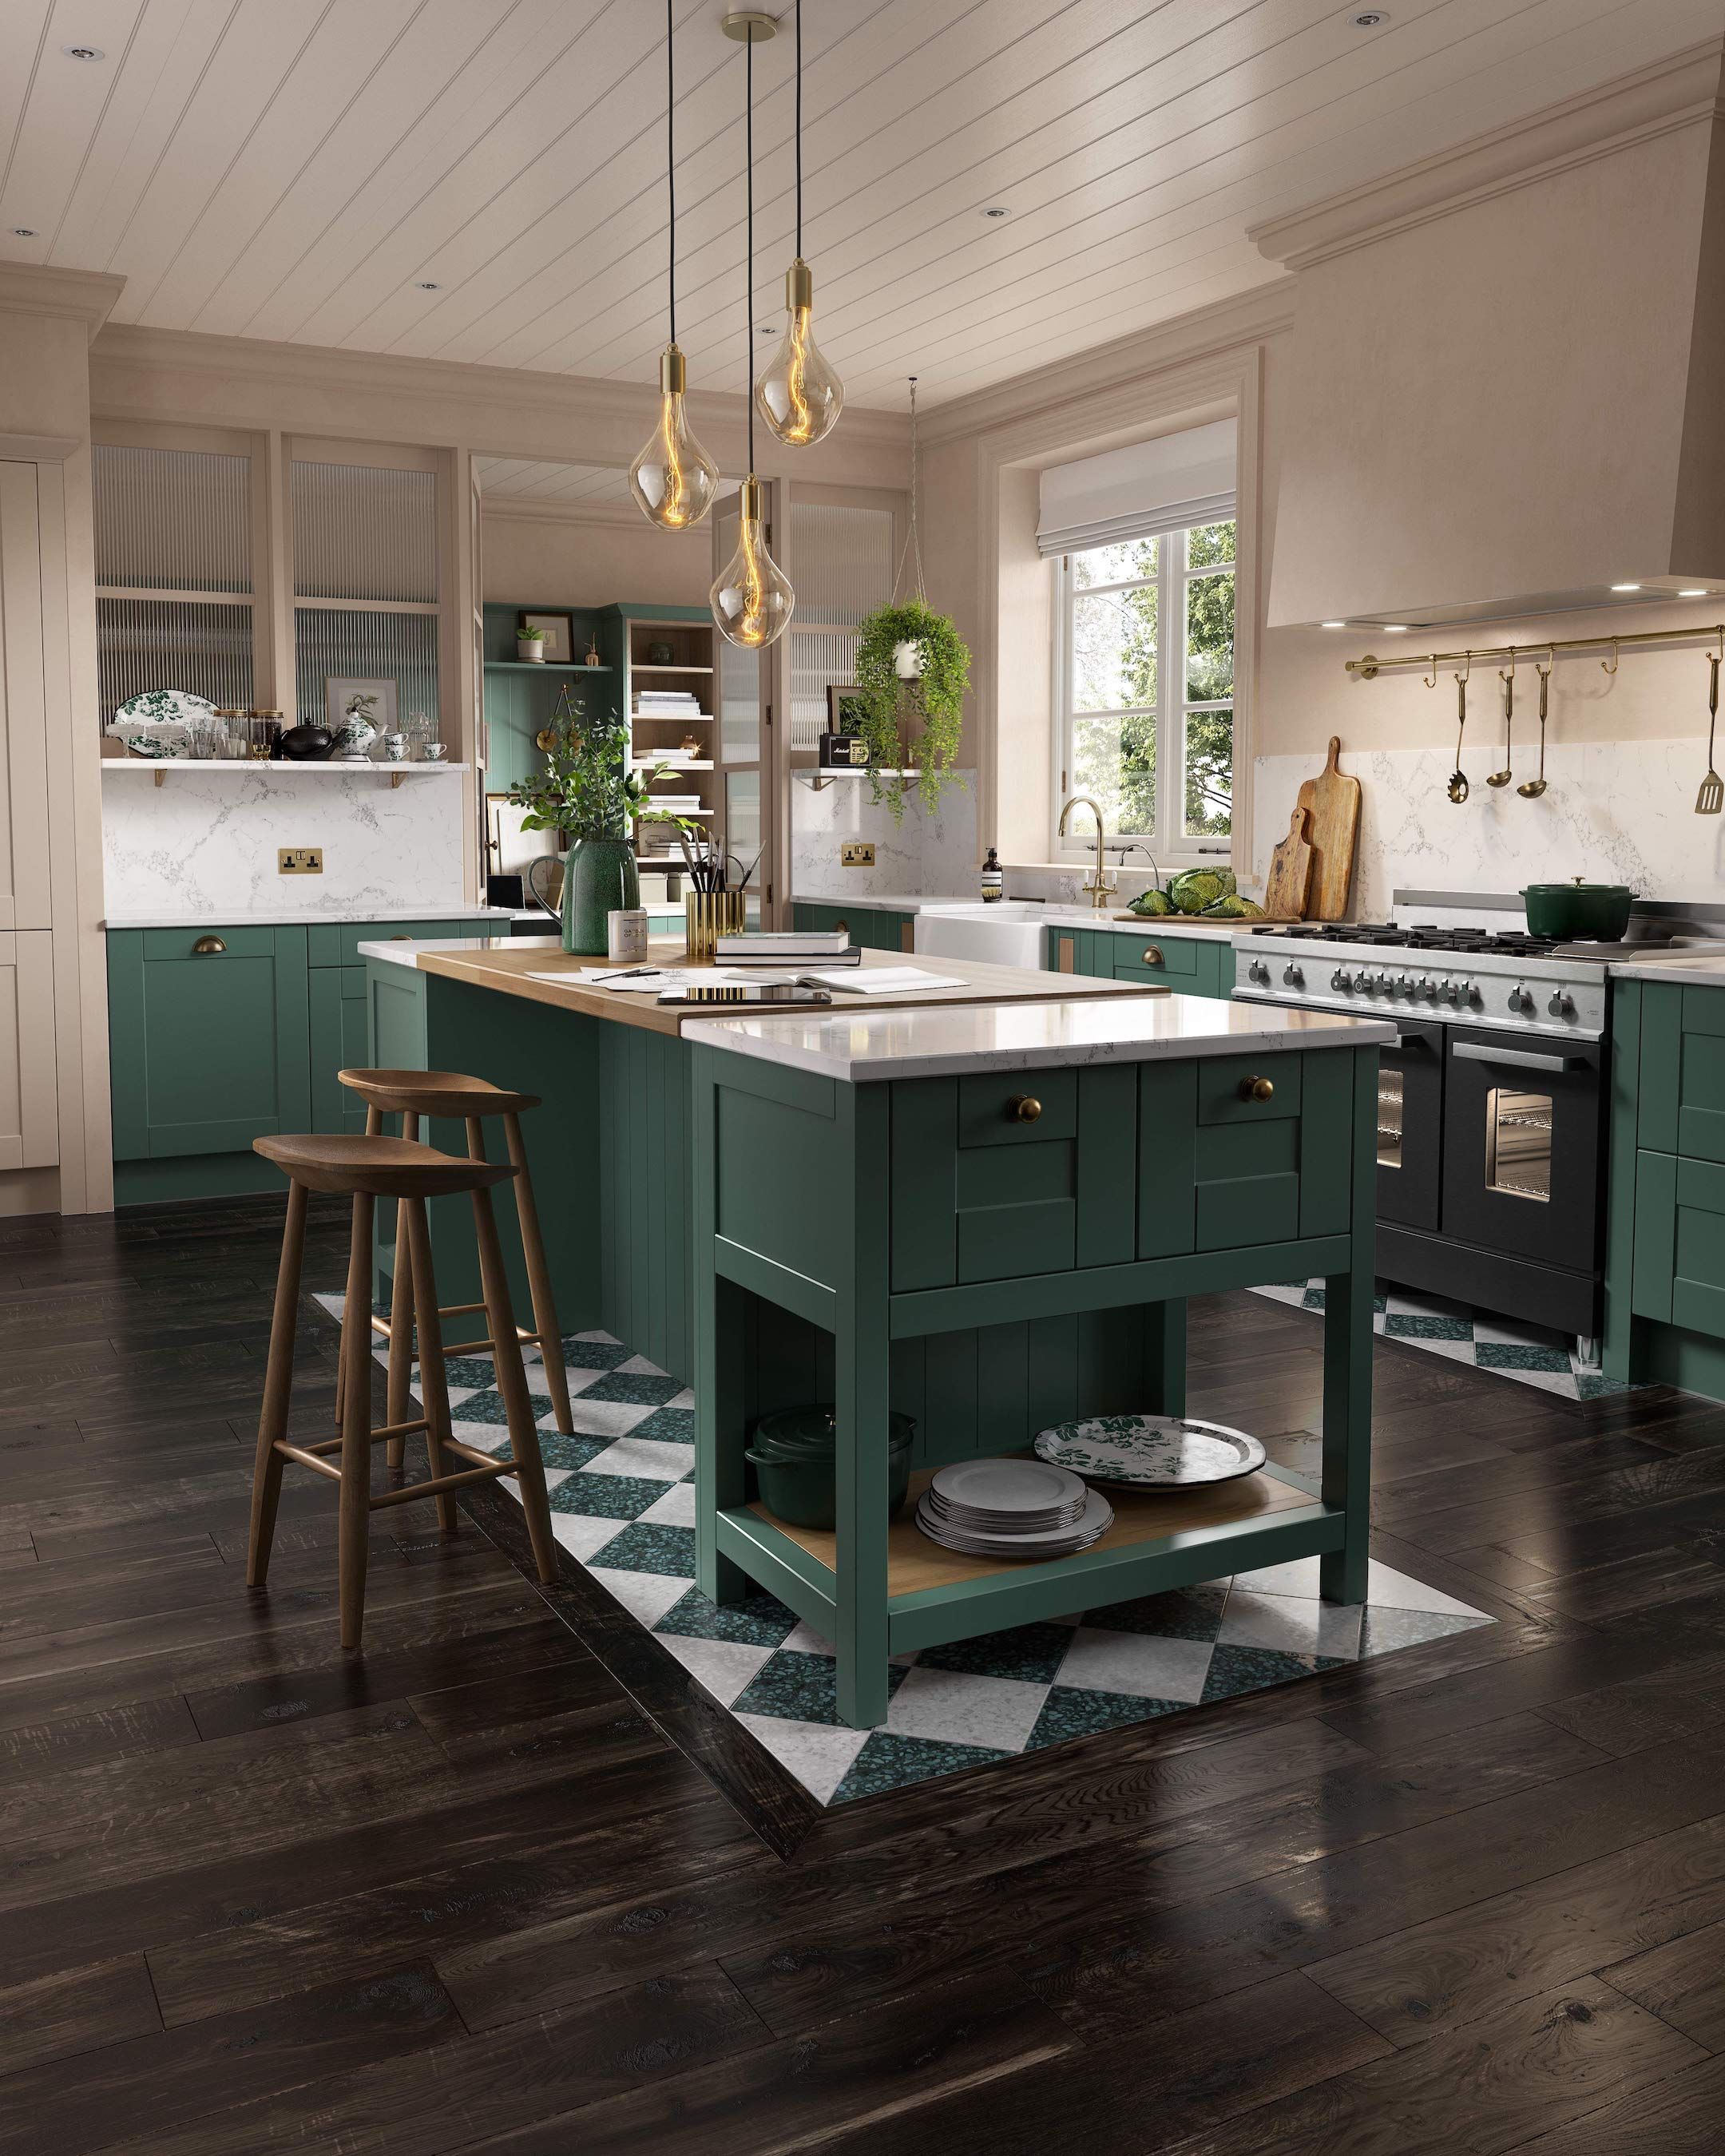 Mint and Copper Kitchen Inspiration